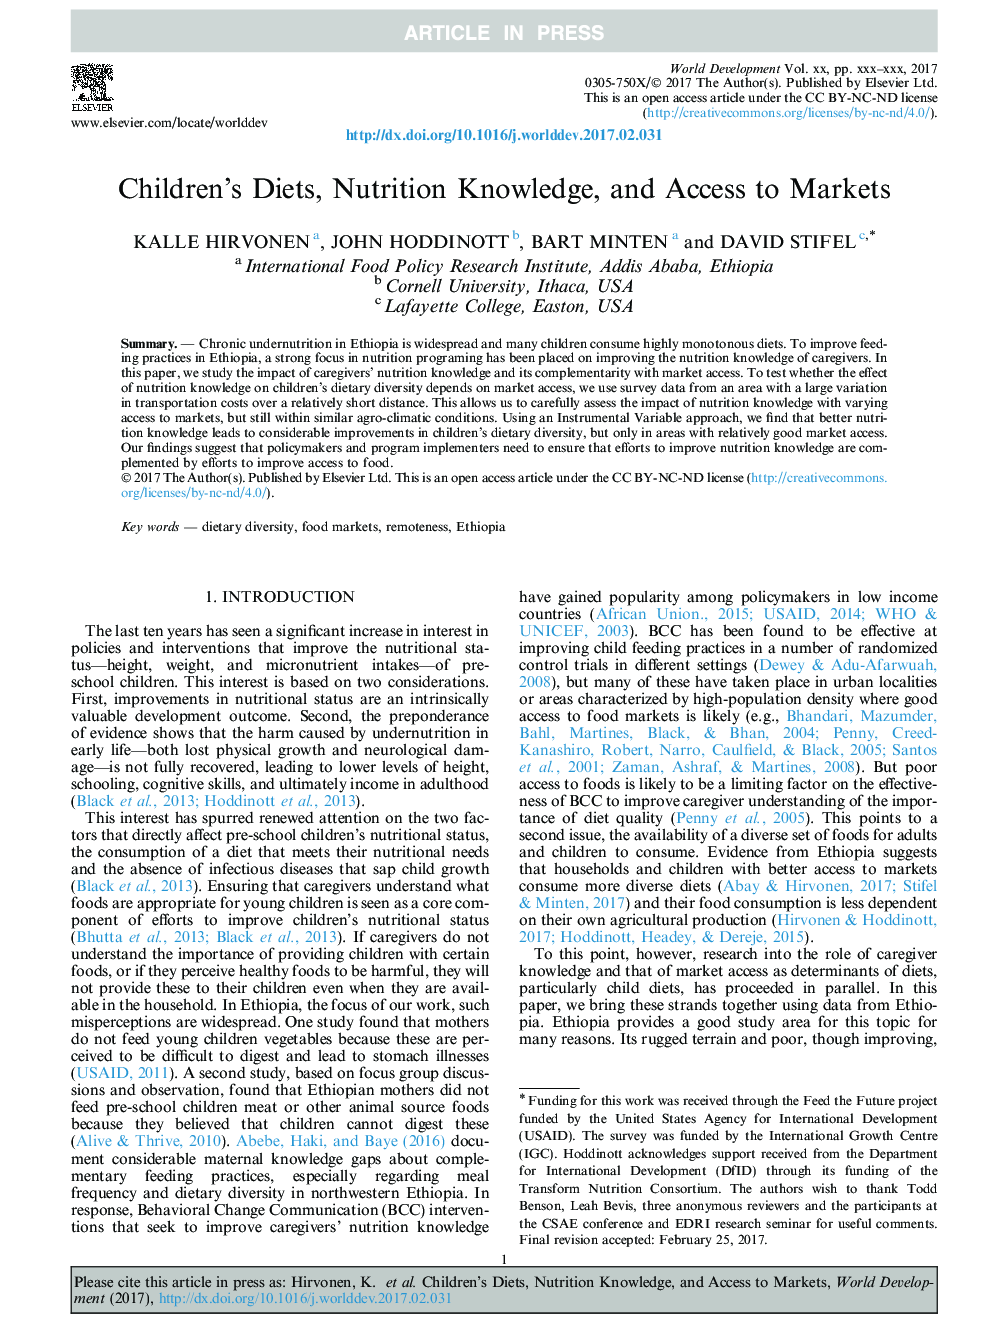 Children's Diets, Nutrition Knowledge, and Access to Markets